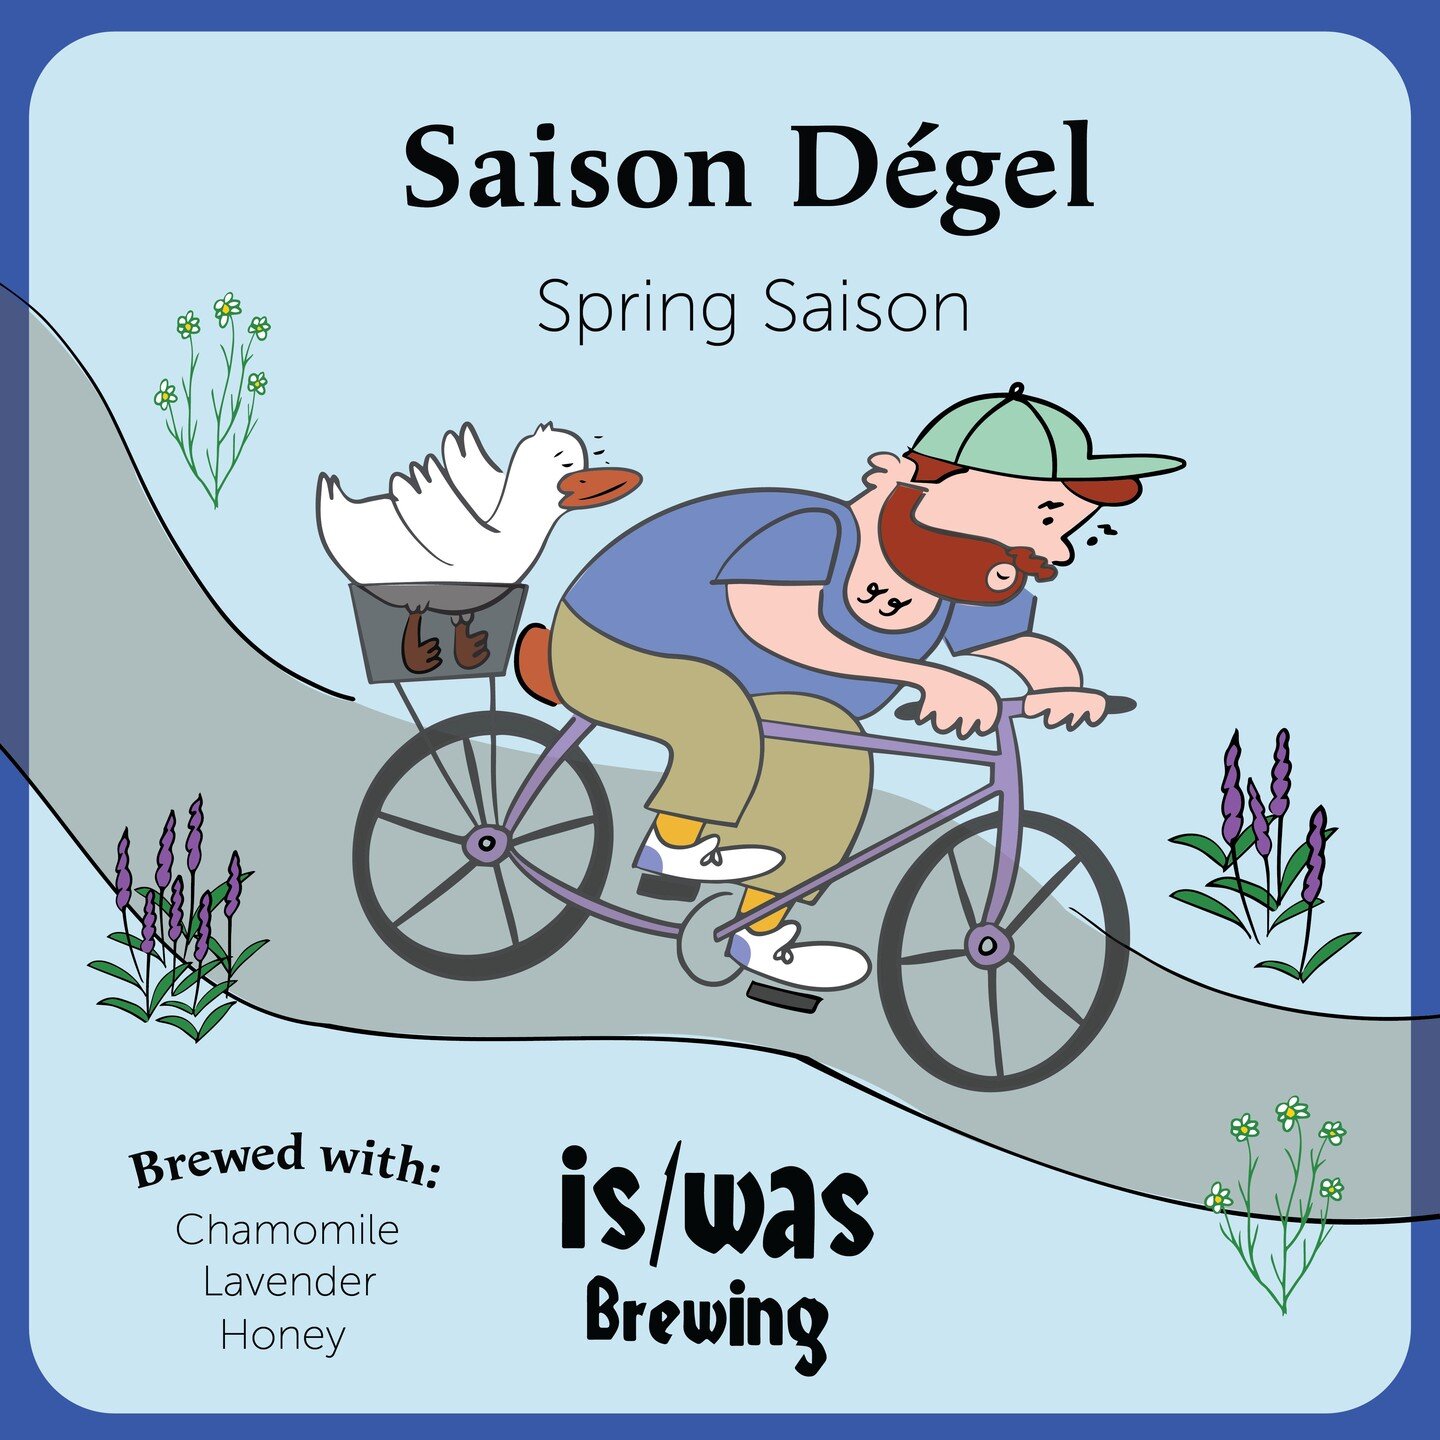 Saison D&eacute;gel, our Spring saison brewed with chamomile, lavender and honey, is available now in our online store for pickup at @begylebrewing (link in bio) and will hit full distro this week.⁣
⁣
Constructed to drink the thaw that spring brings,